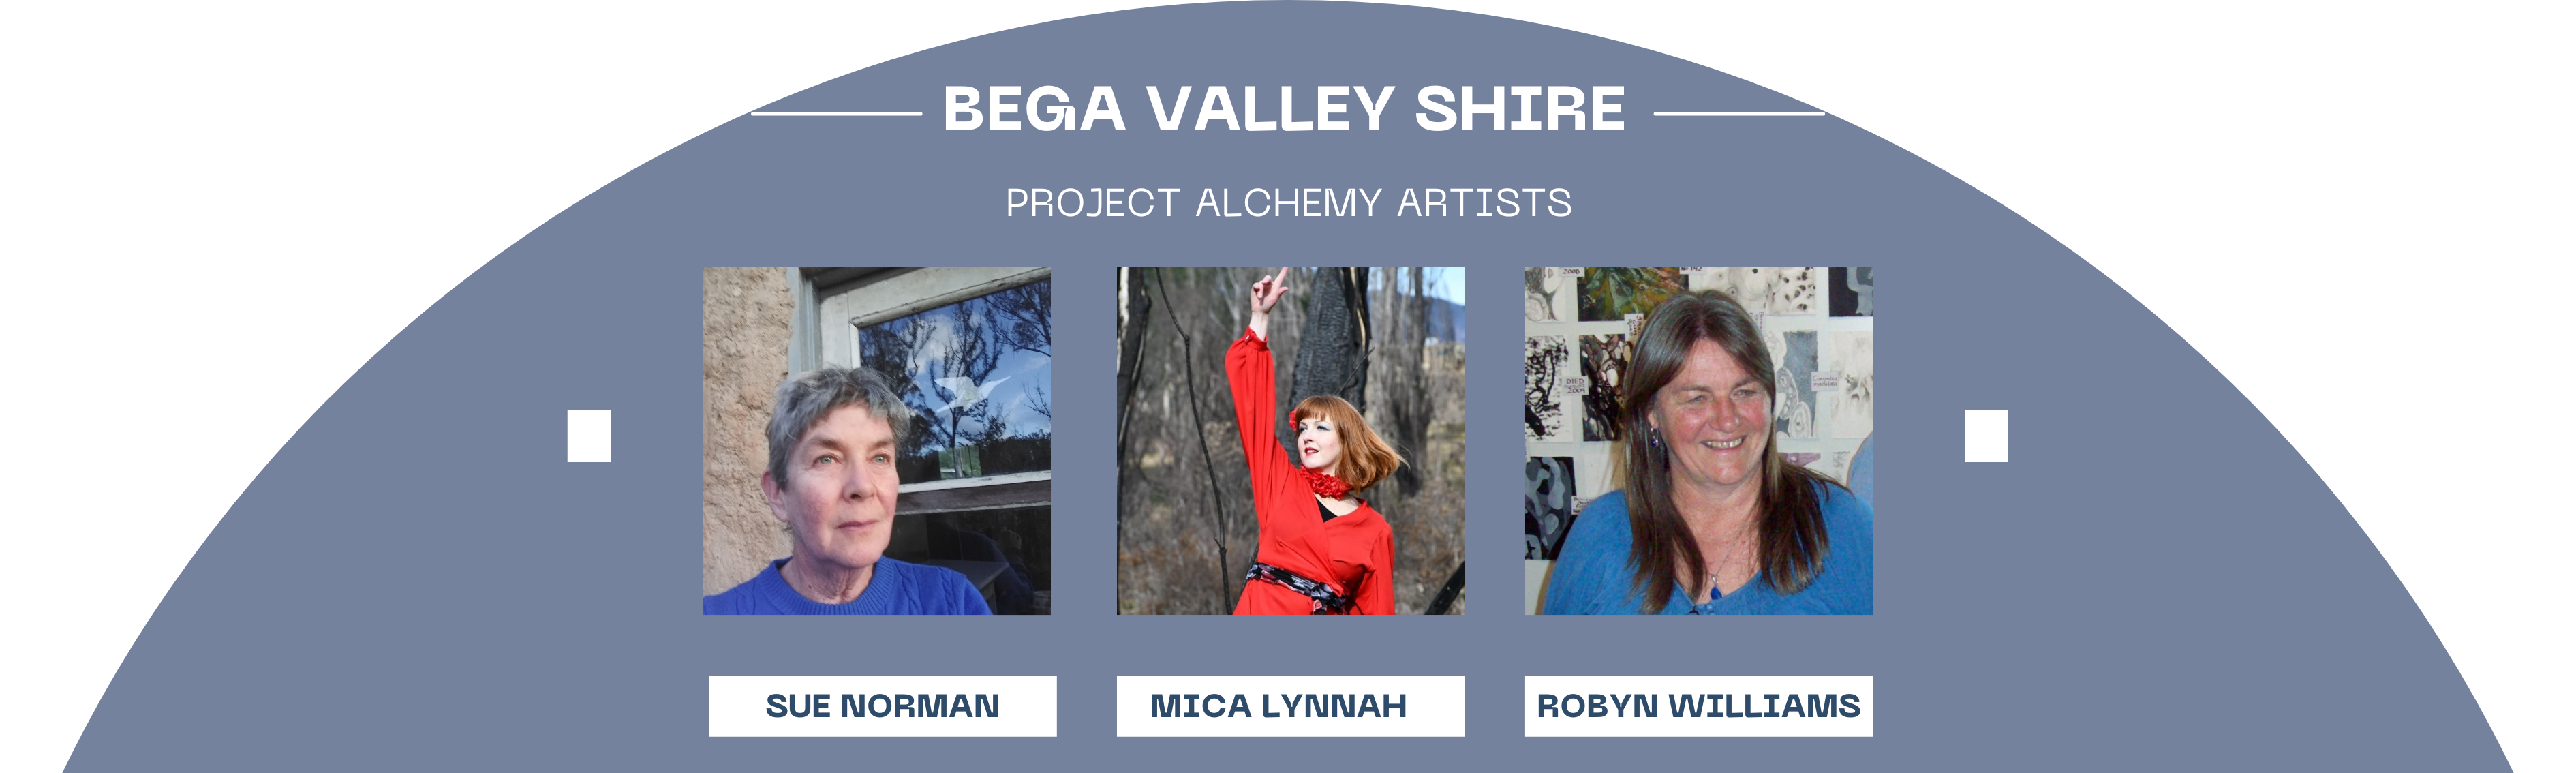 Bega Valley Shire Project Alchemy Artists